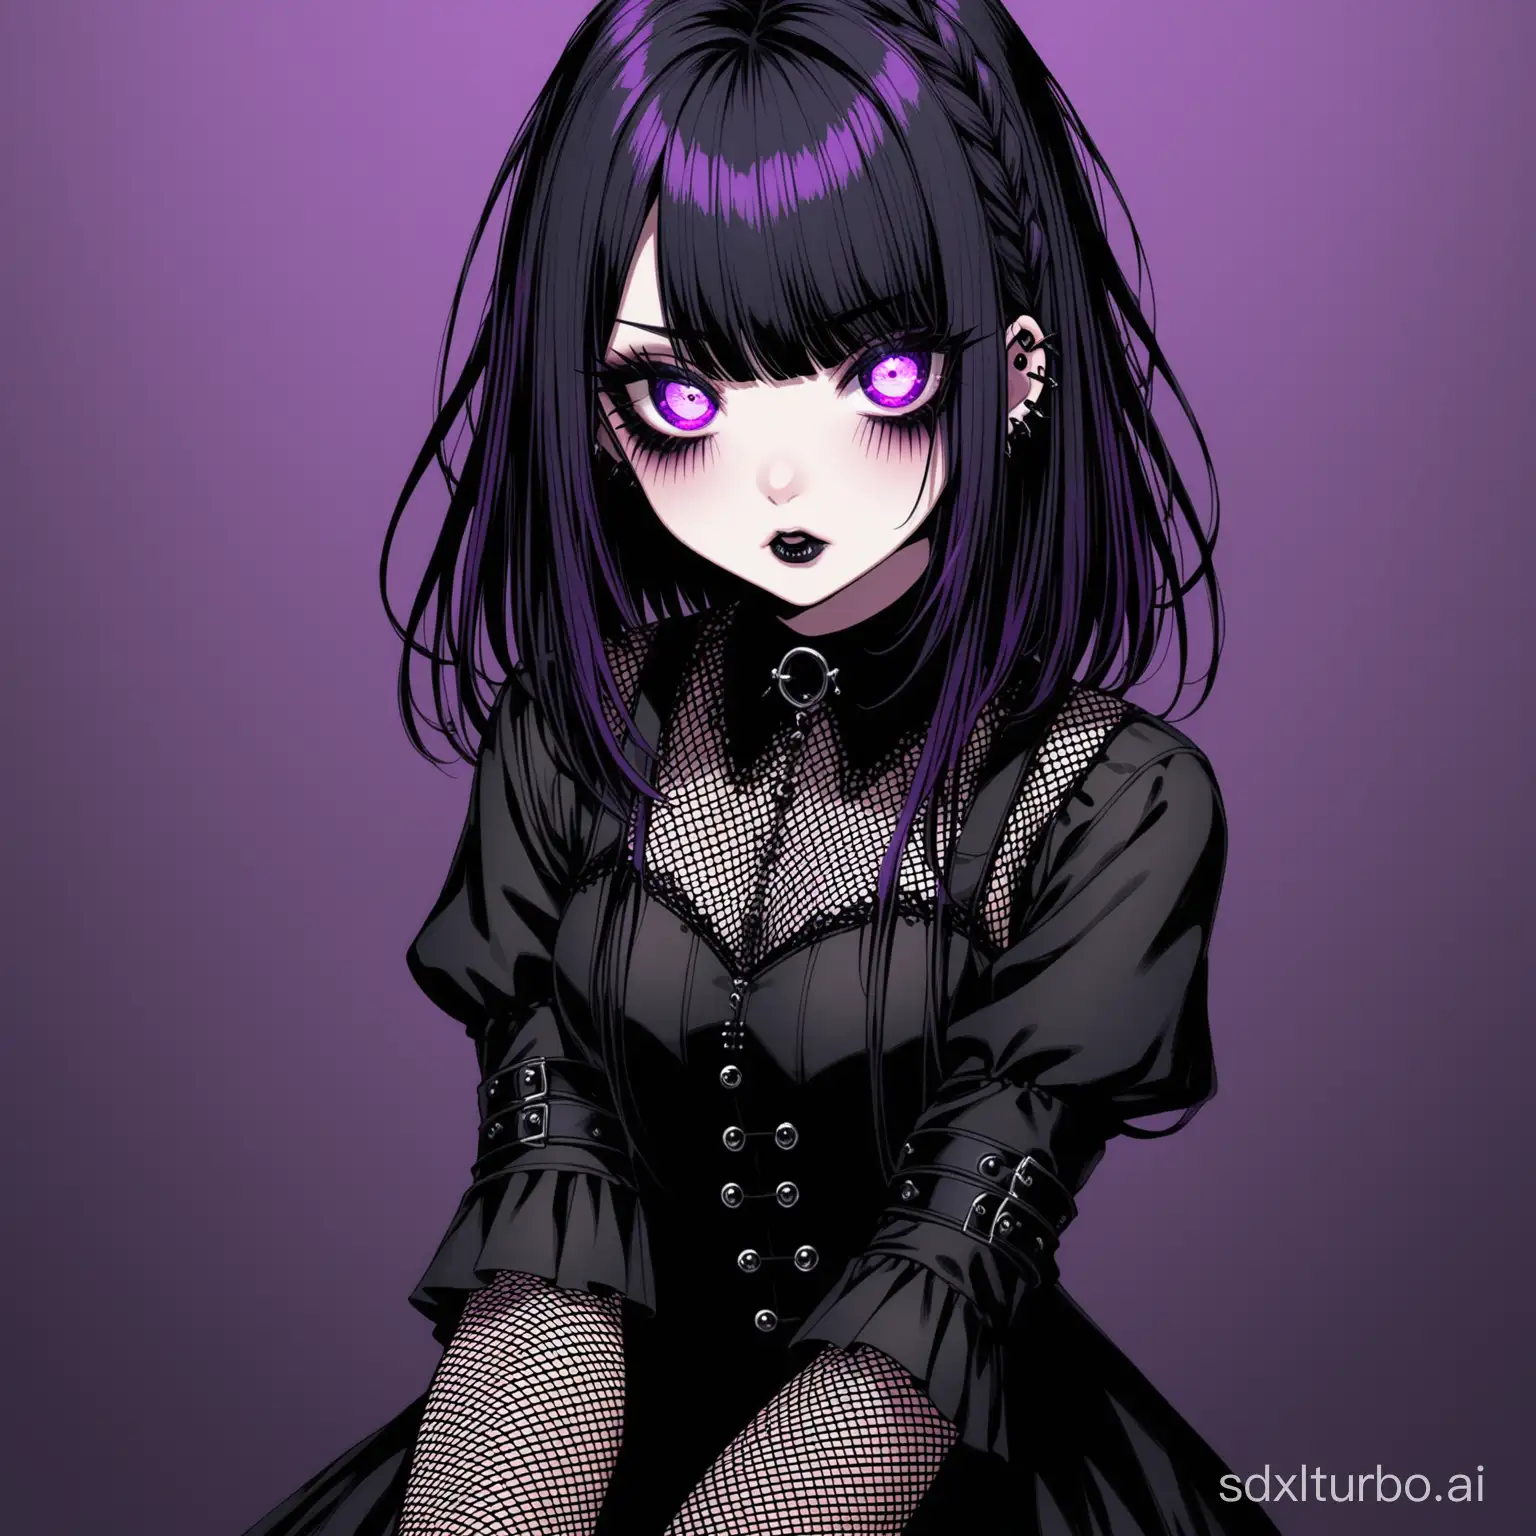 A goth girl with fishnets, dyed hair, and hypnotized eyes